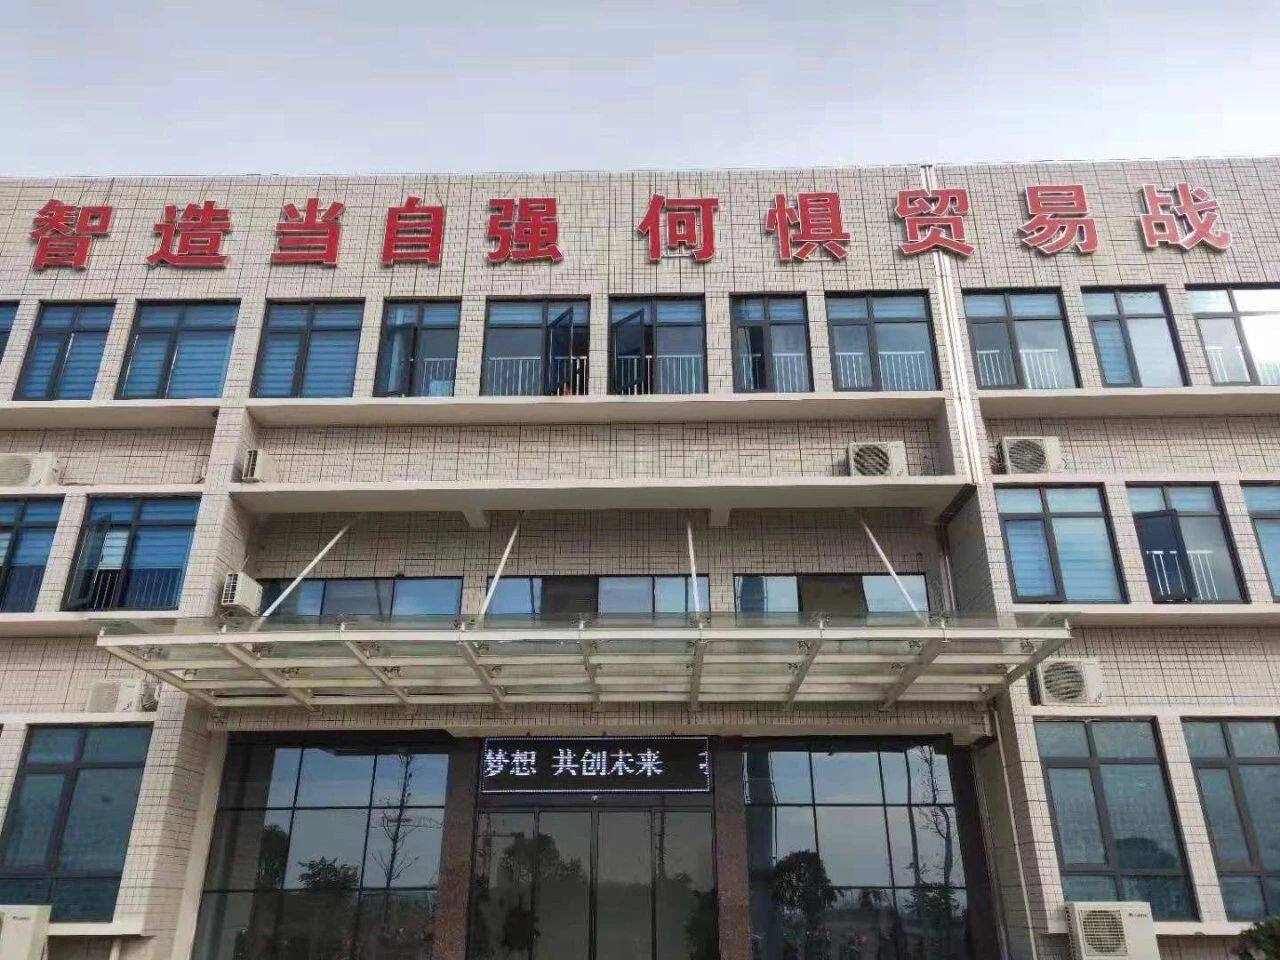 Shenzhen Boltpower Technology Co., Ltd. has successfully passed the national military standard quality management system certification